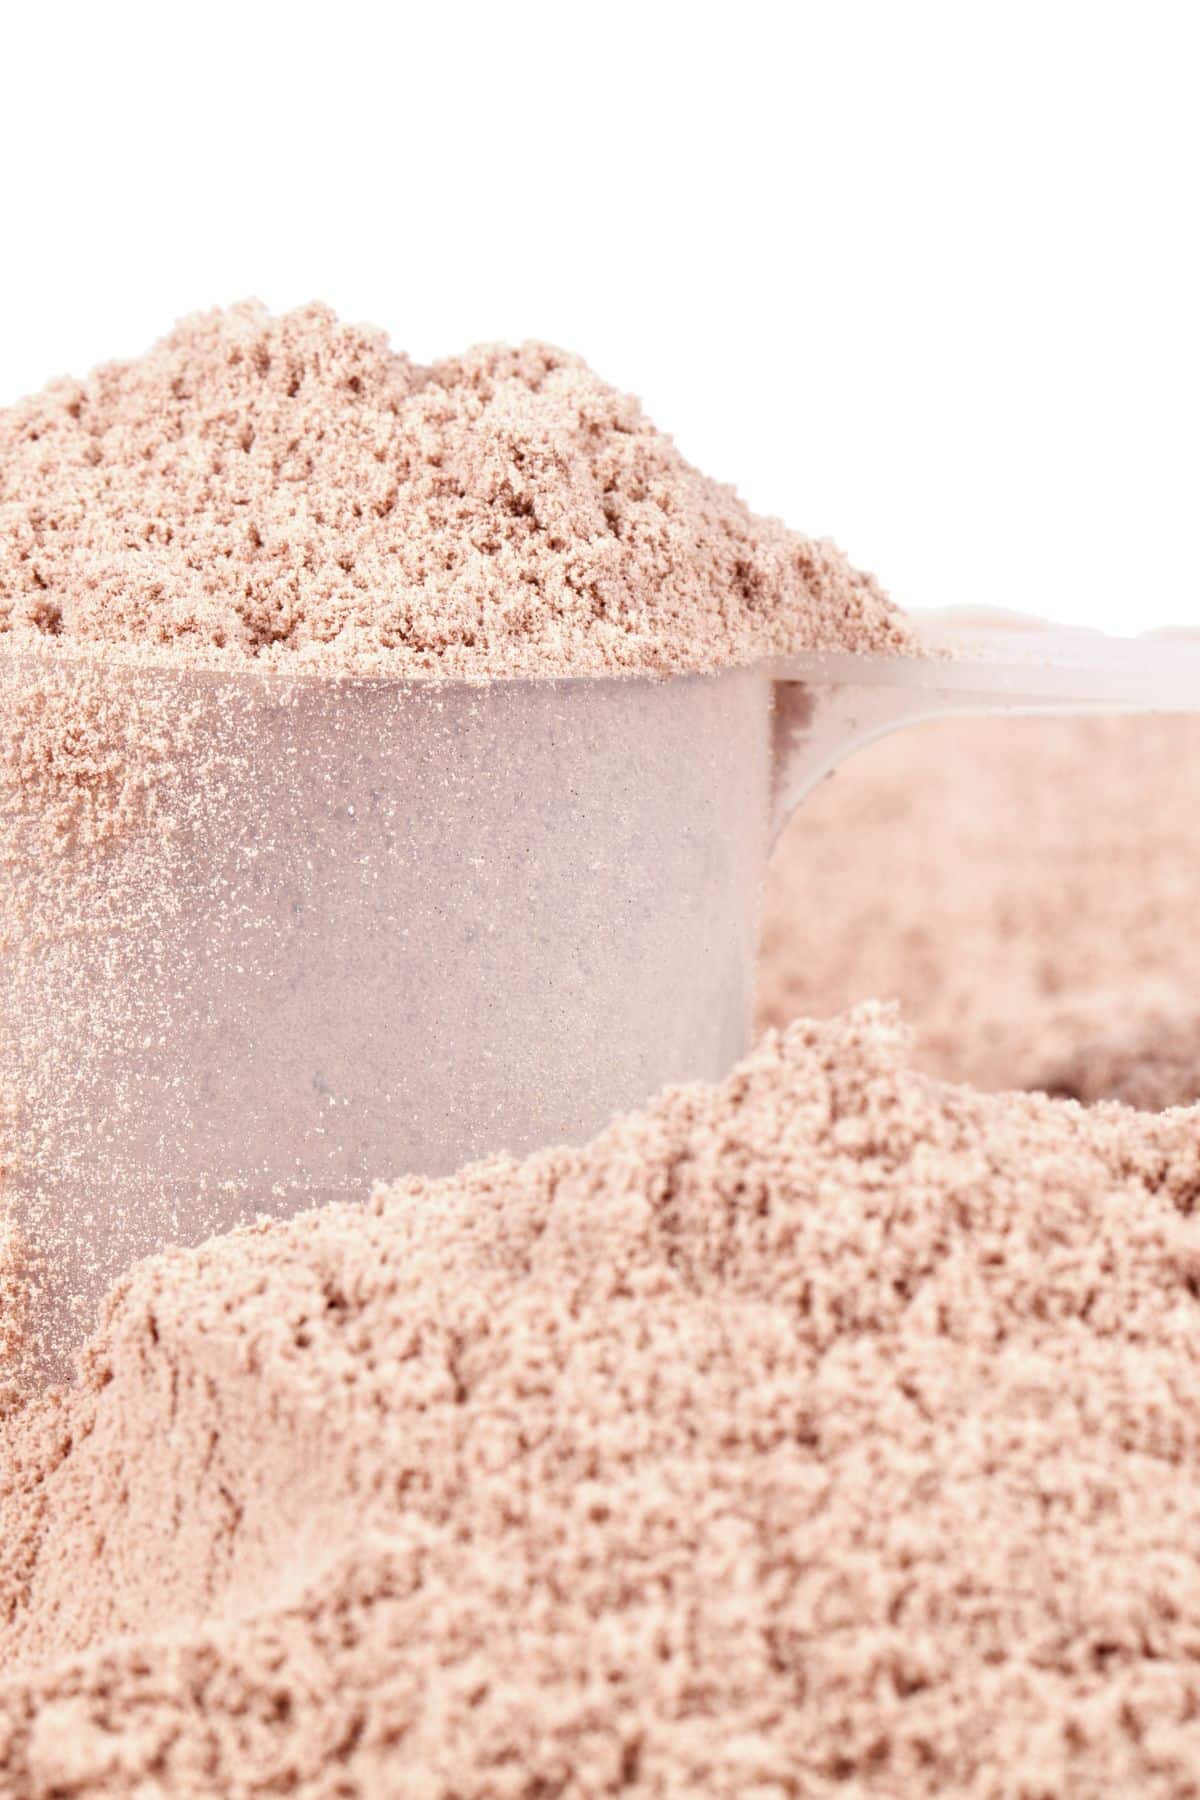 a scoop of whey protein isolate sitting on a mound of whey protein isolate.